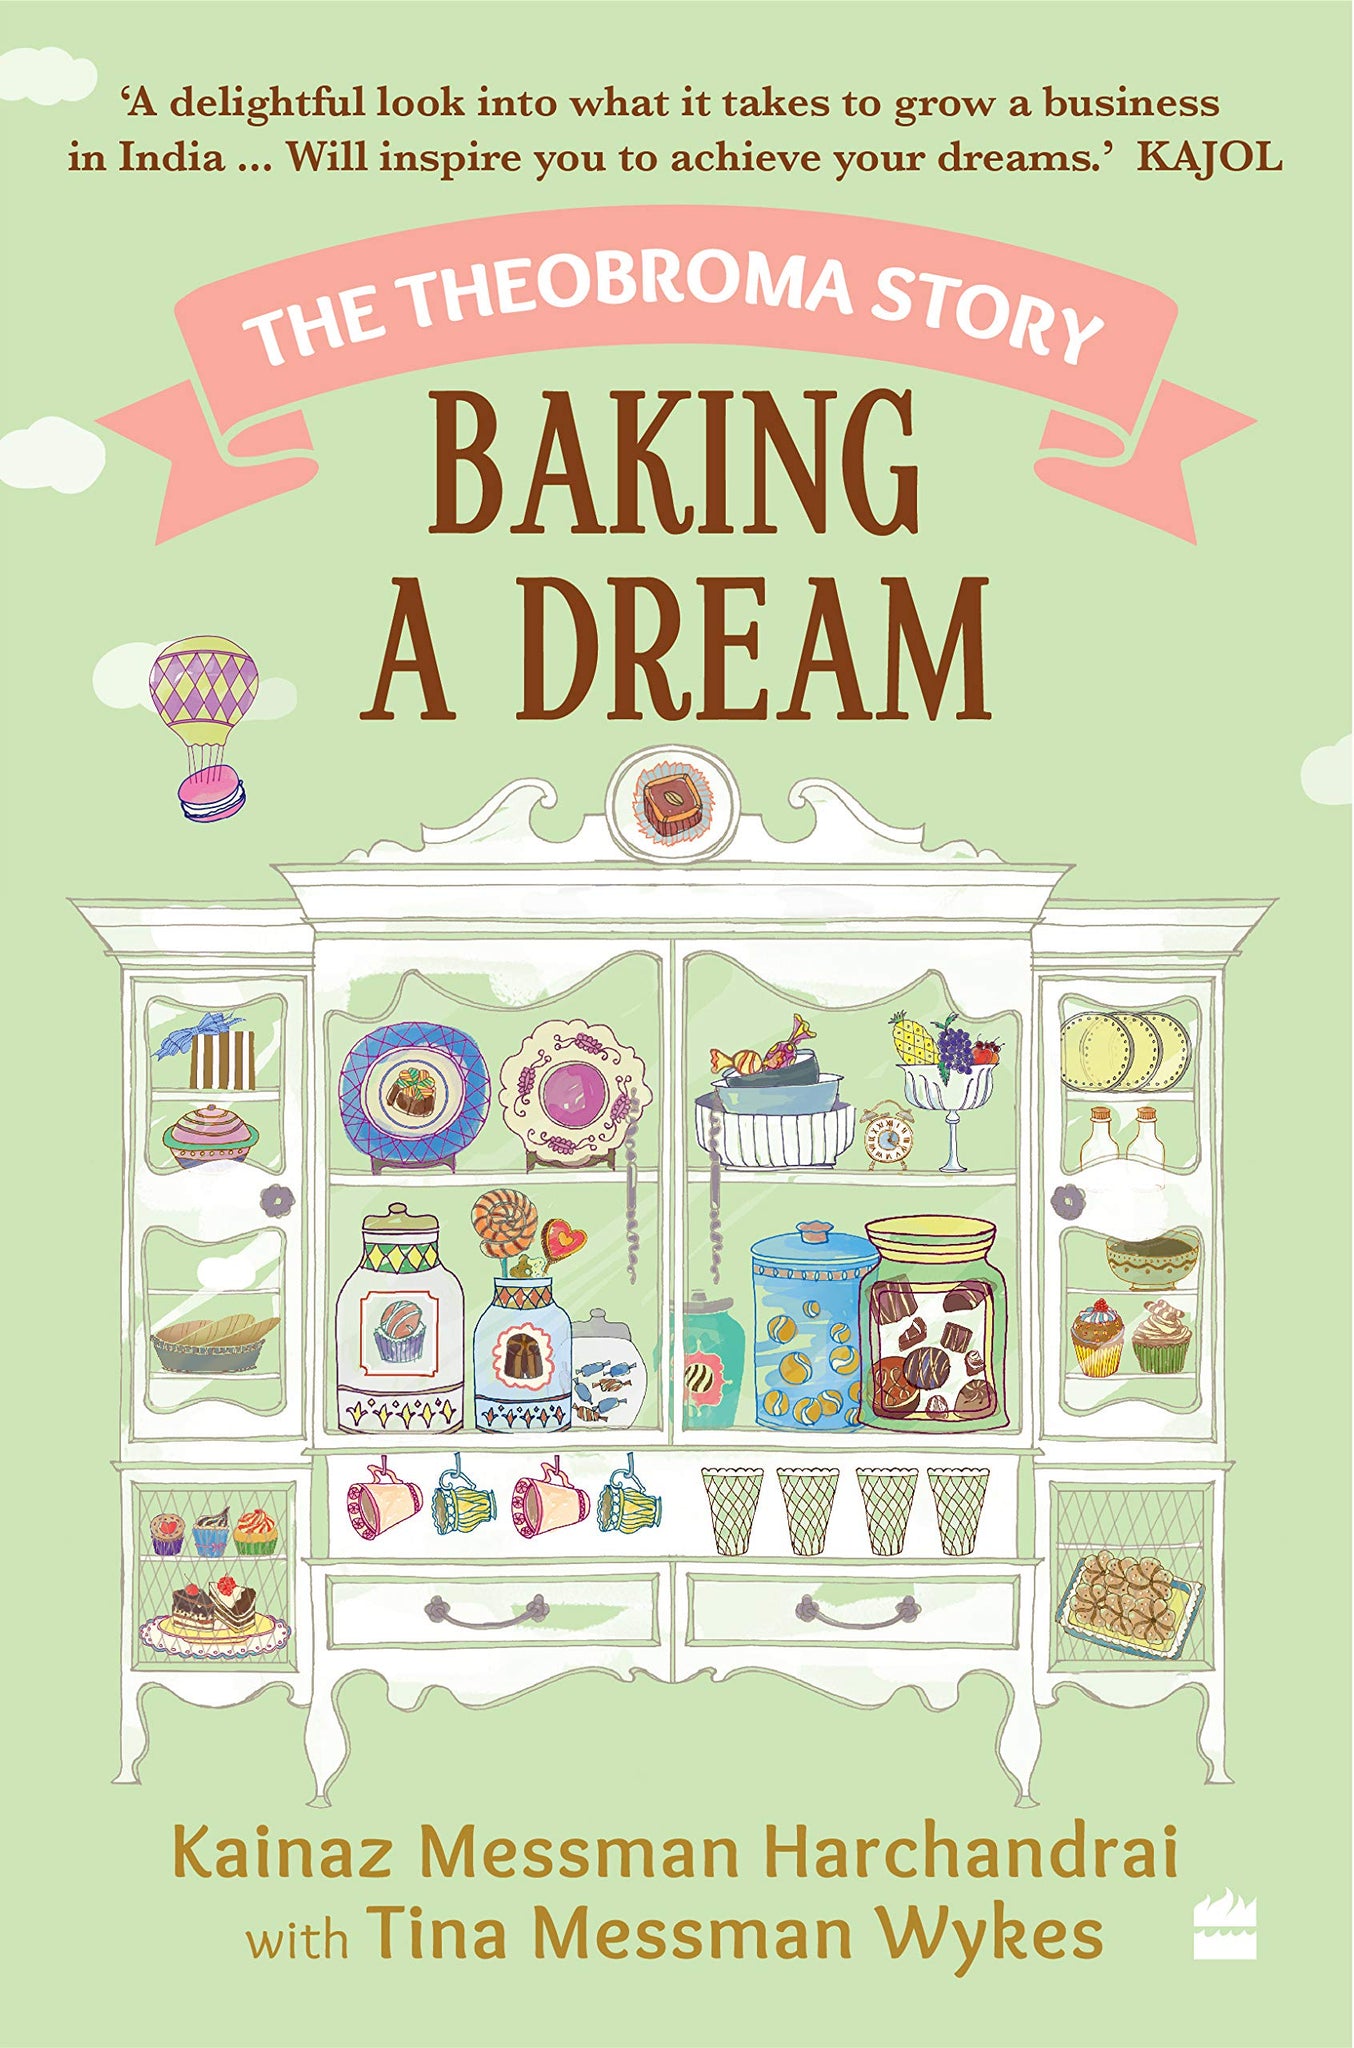 Baking a Dream: The Theobroma Stroy